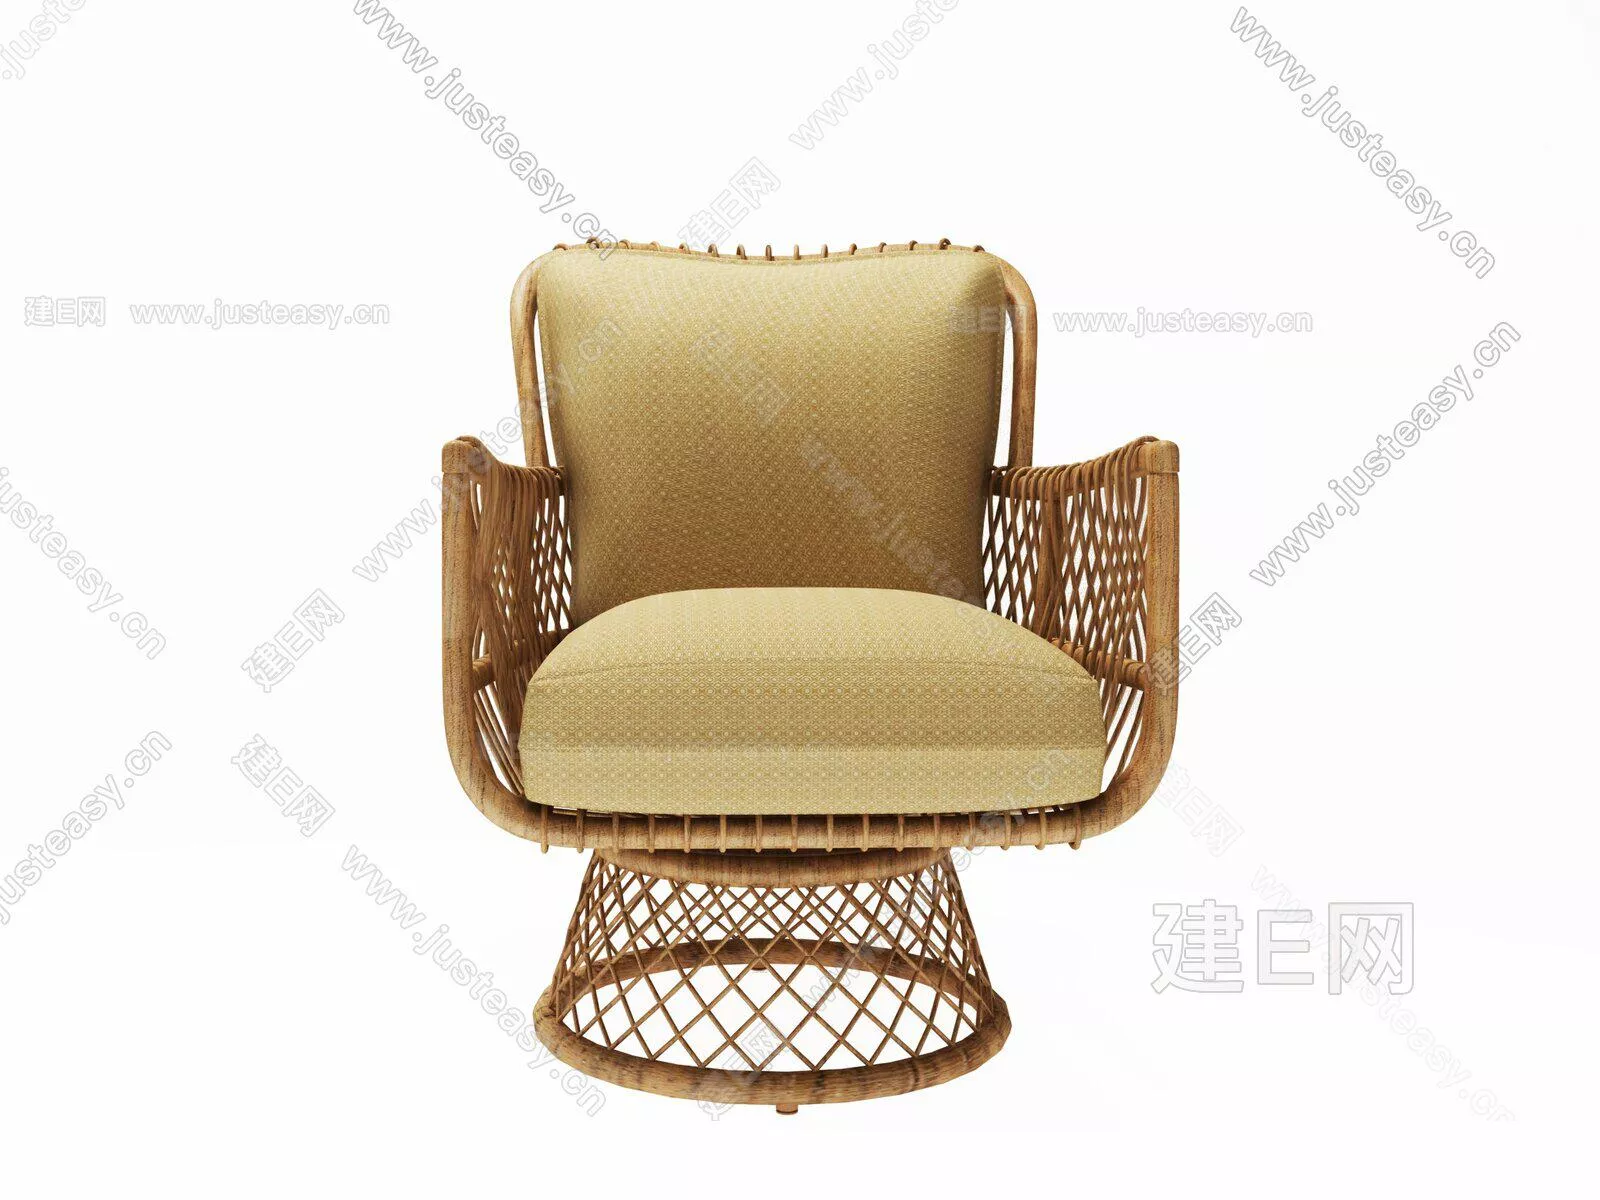 AMERICAN LOUNGLE CHAIR - SKETCHUP 3D MODEL - ENSCAPE - 110775606